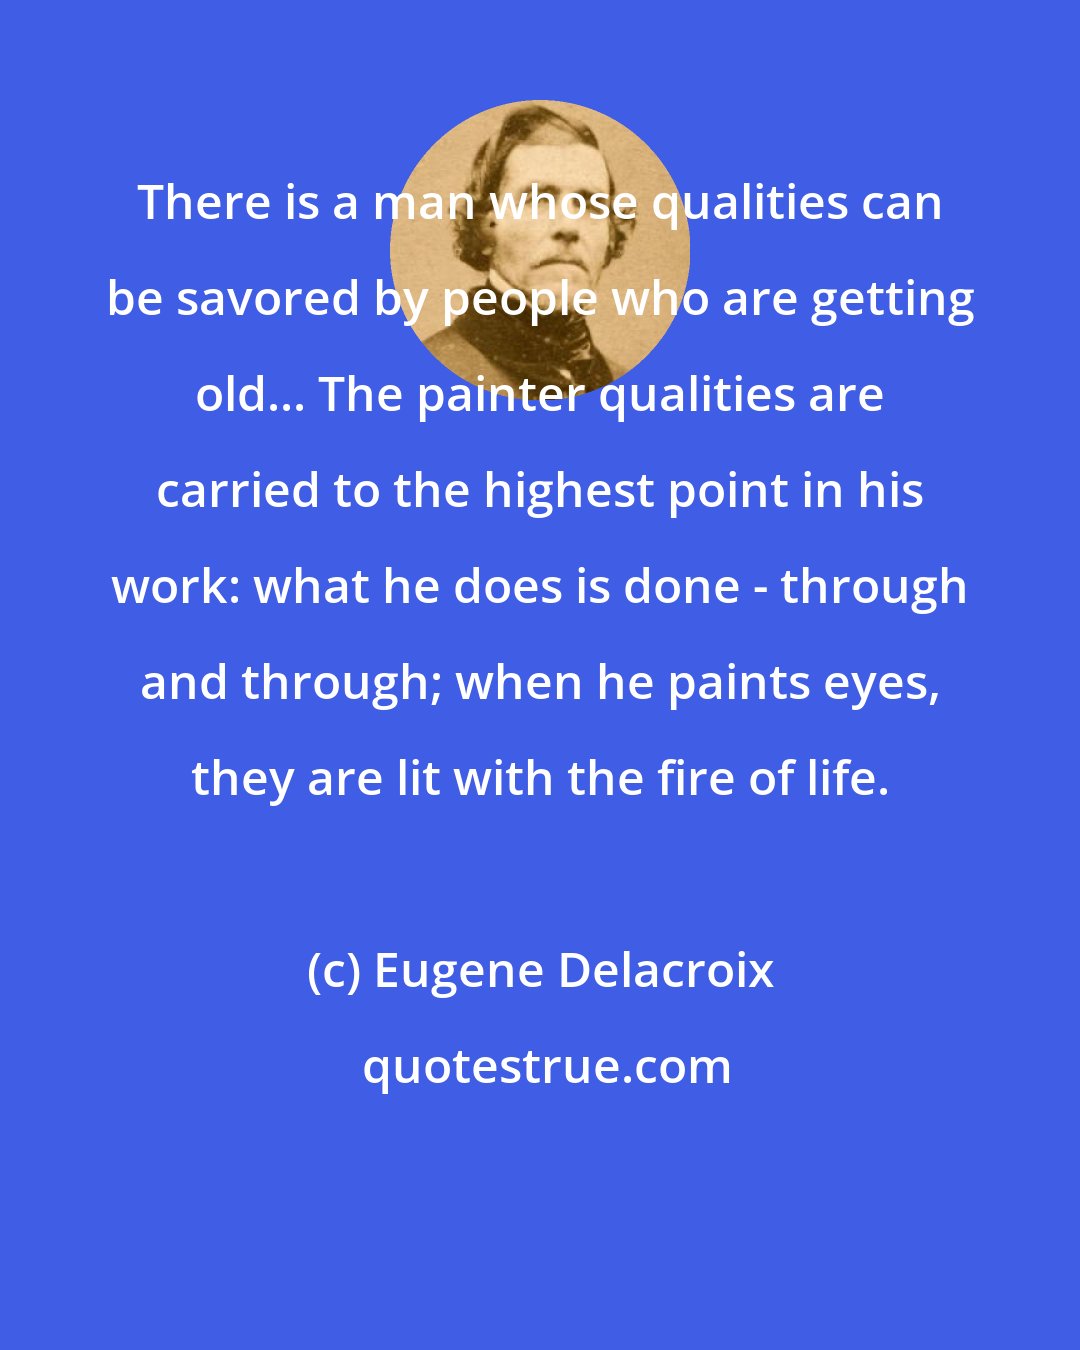 Eugene Delacroix: There is a man whose qualities can be savored by people who are getting old... The painter qualities are carried to the highest point in his work: what he does is done - through and through; when he paints eyes, they are lit with the fire of life.